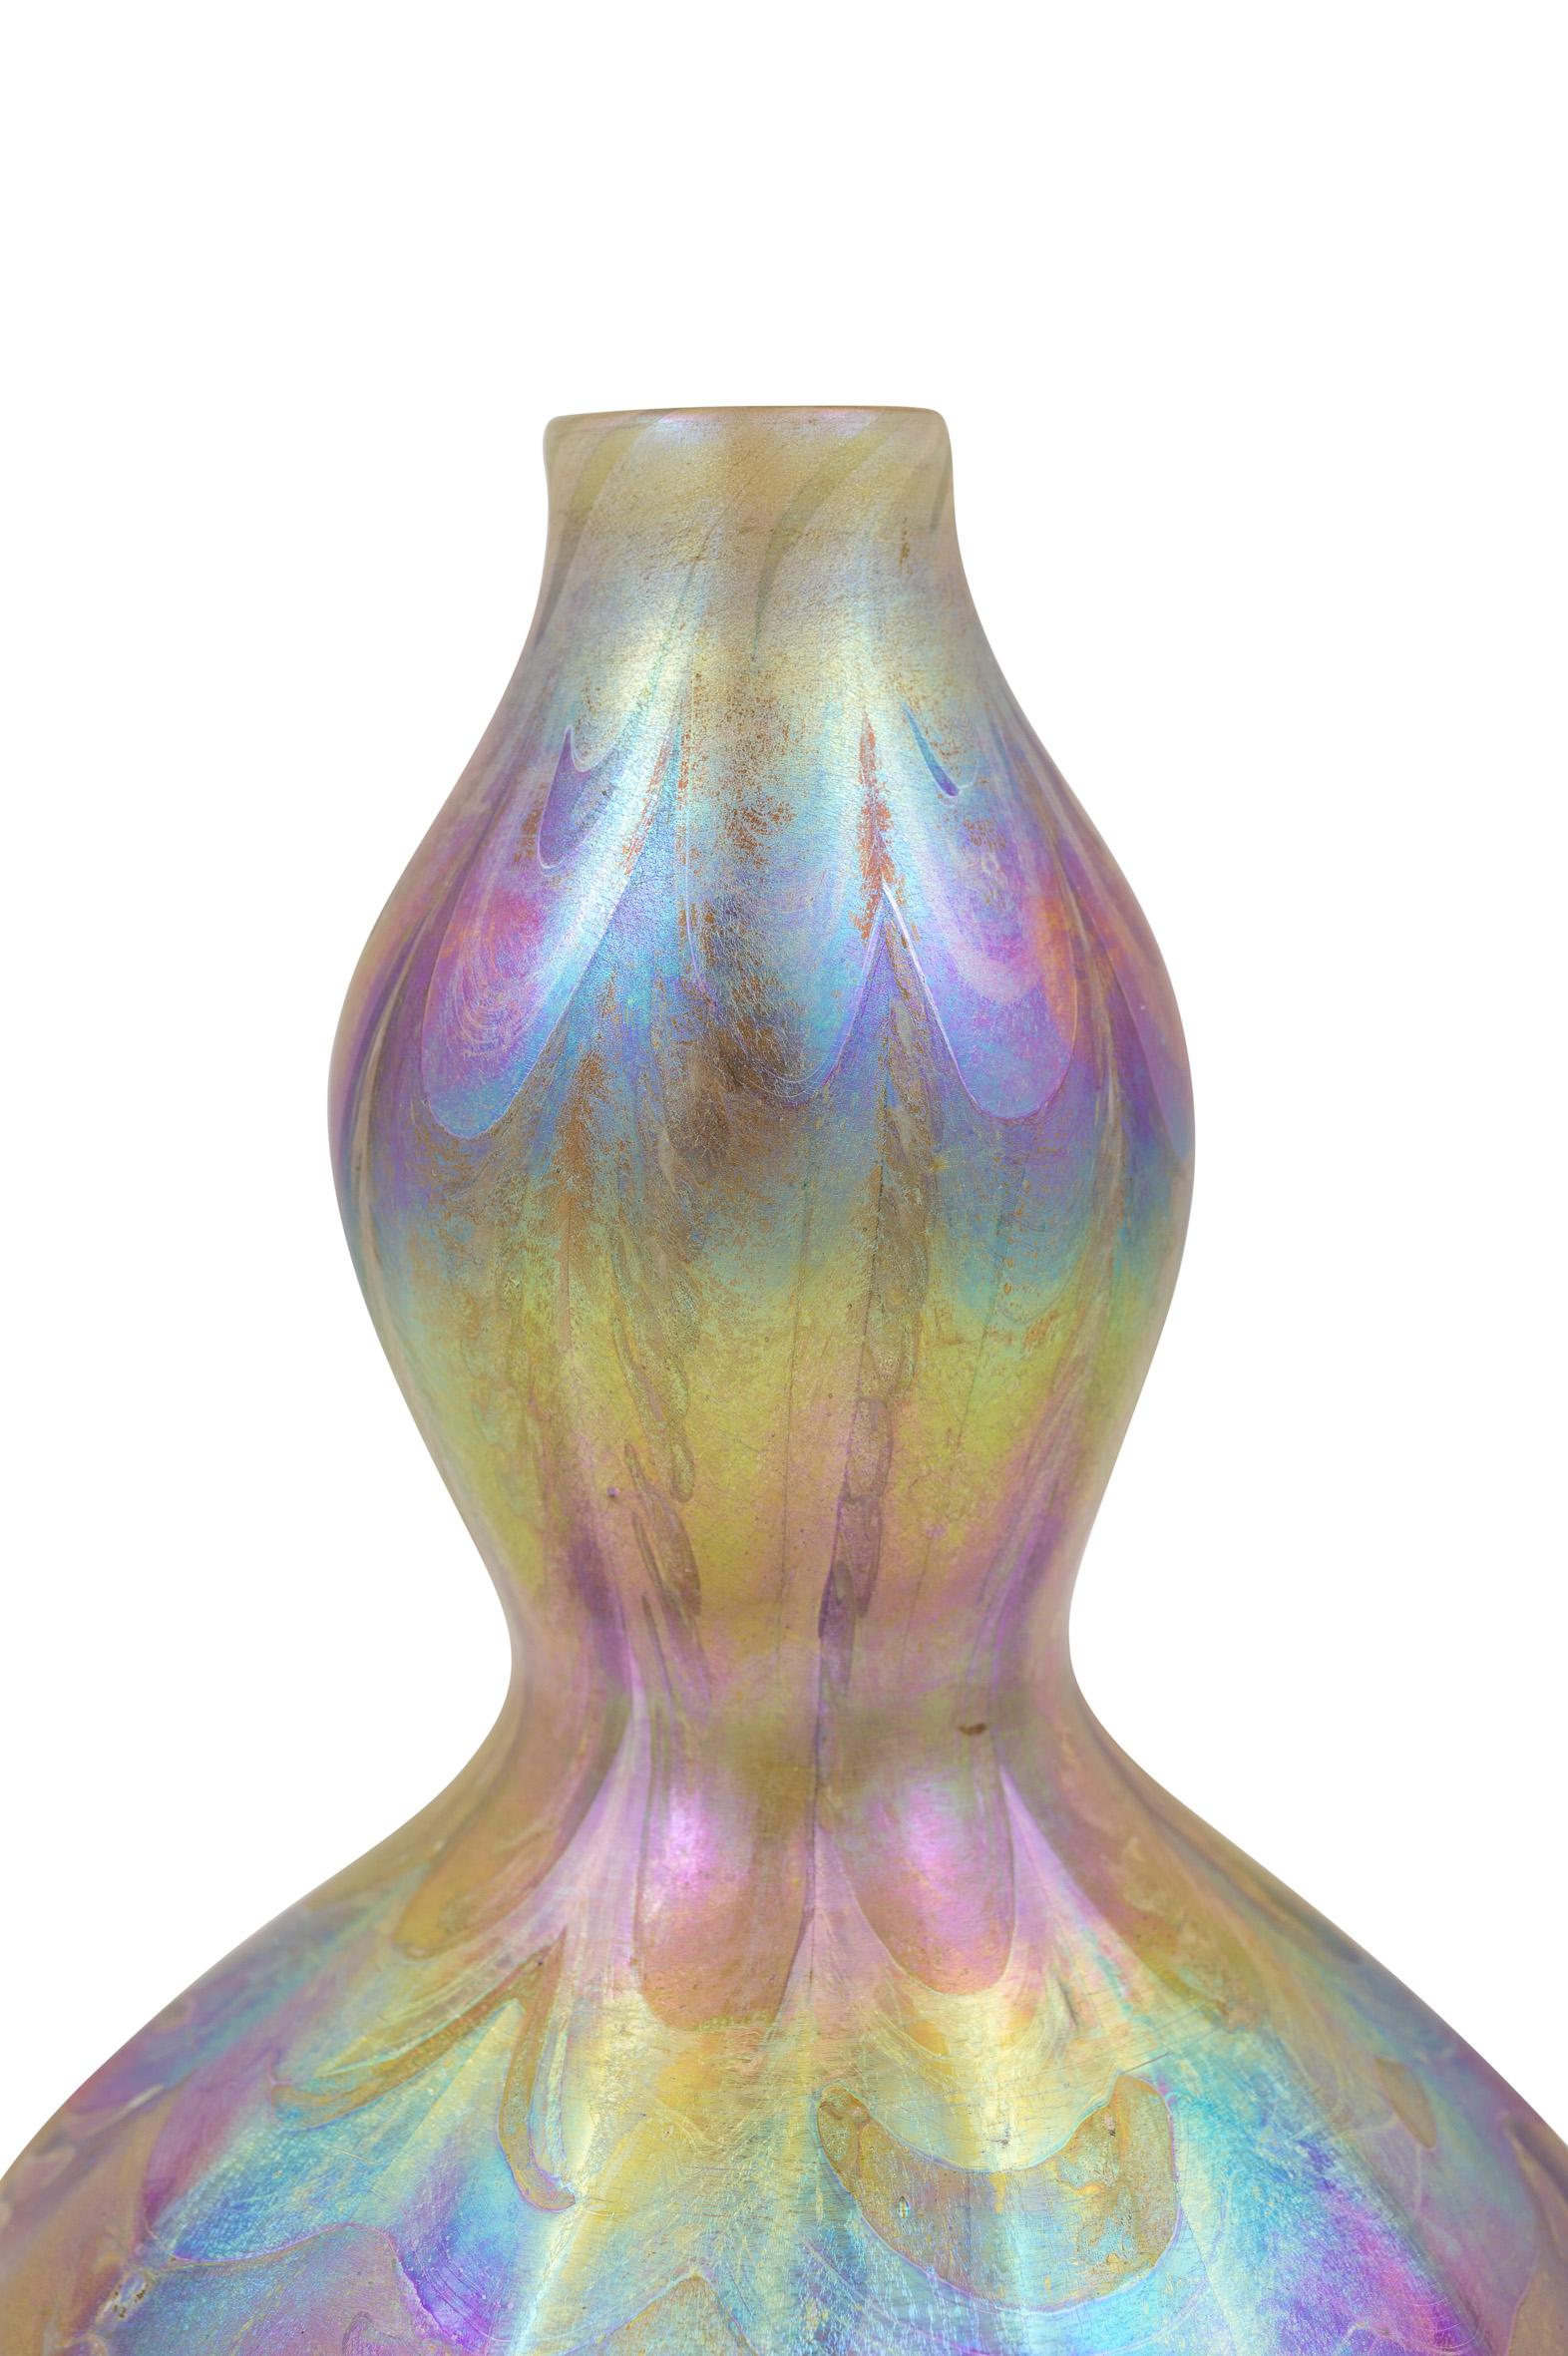 Late 19th Century Glass Vase Louis C. Tiffany New York Tiffany Studios 1894 signed For Sale